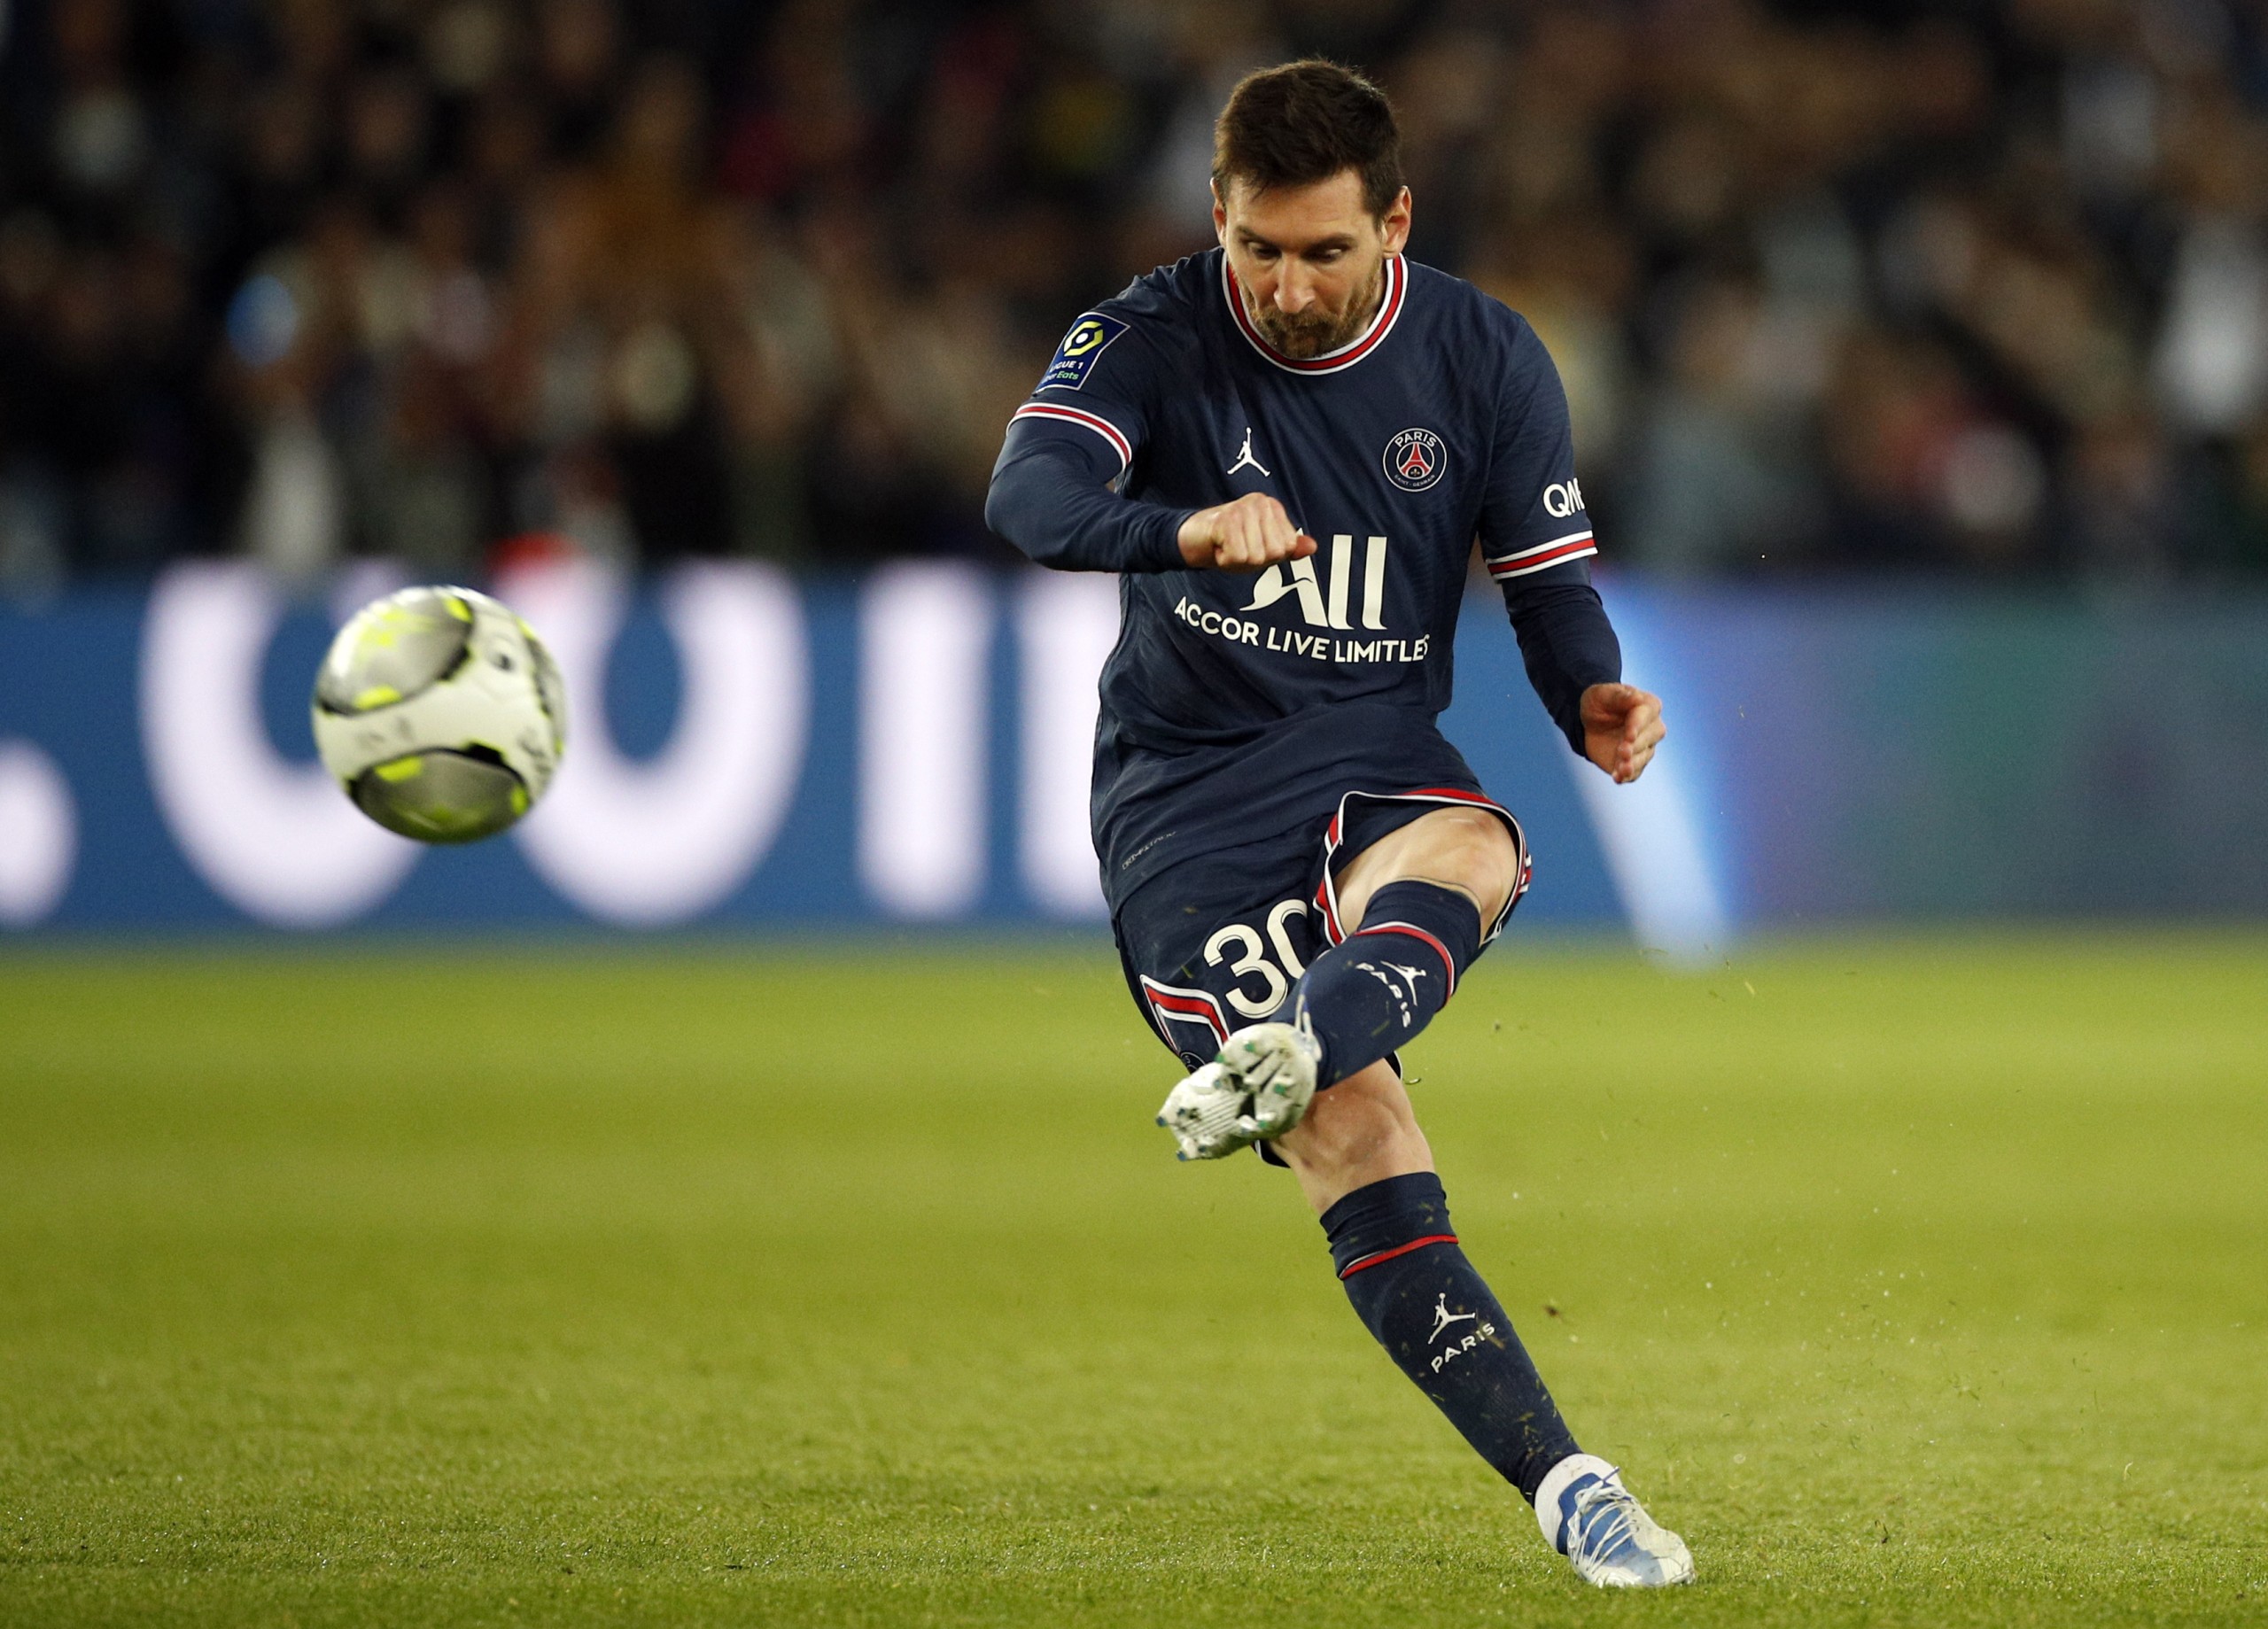 epa09905187 Paris Saint Germain's Lionel Messi in action during the French Ligue 1 soccer match between PSG and RC Lens at the Parc des Princes stadium in Paris, France, 23 April 2022.  EPA/YOAN VALAT